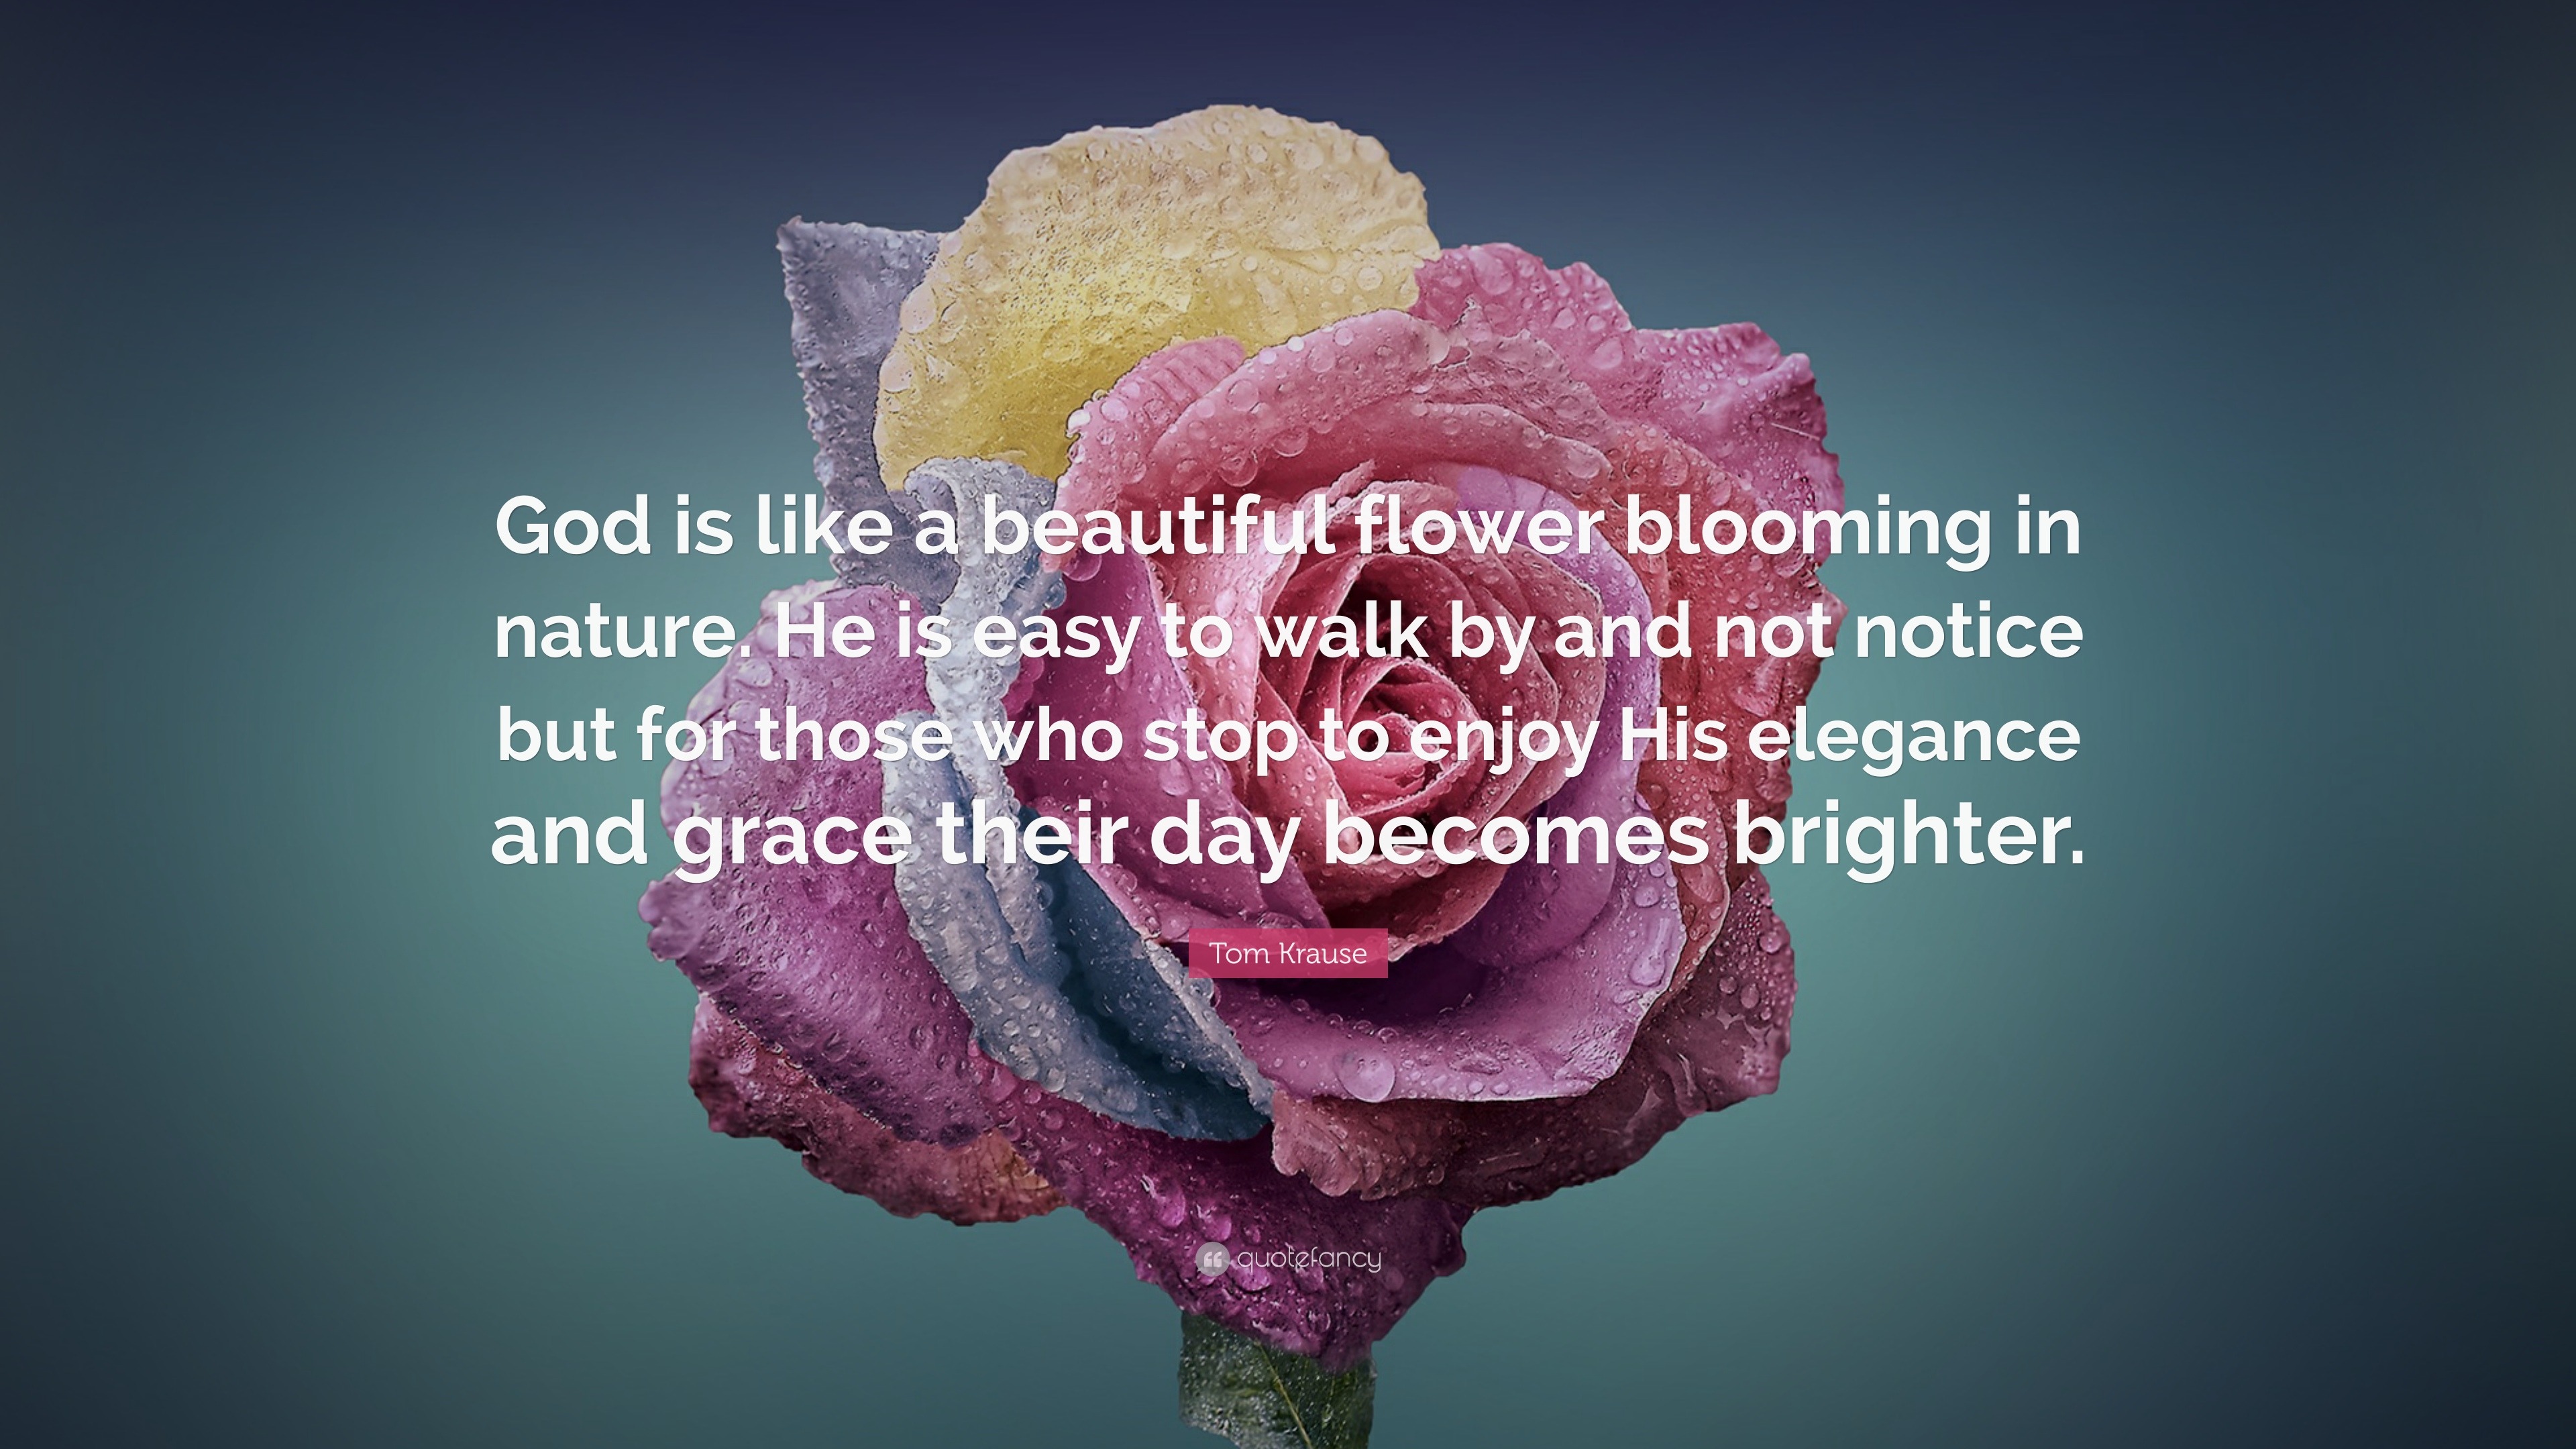 Tom Krause Quote “God is like a beautiful flower blooming in nature He